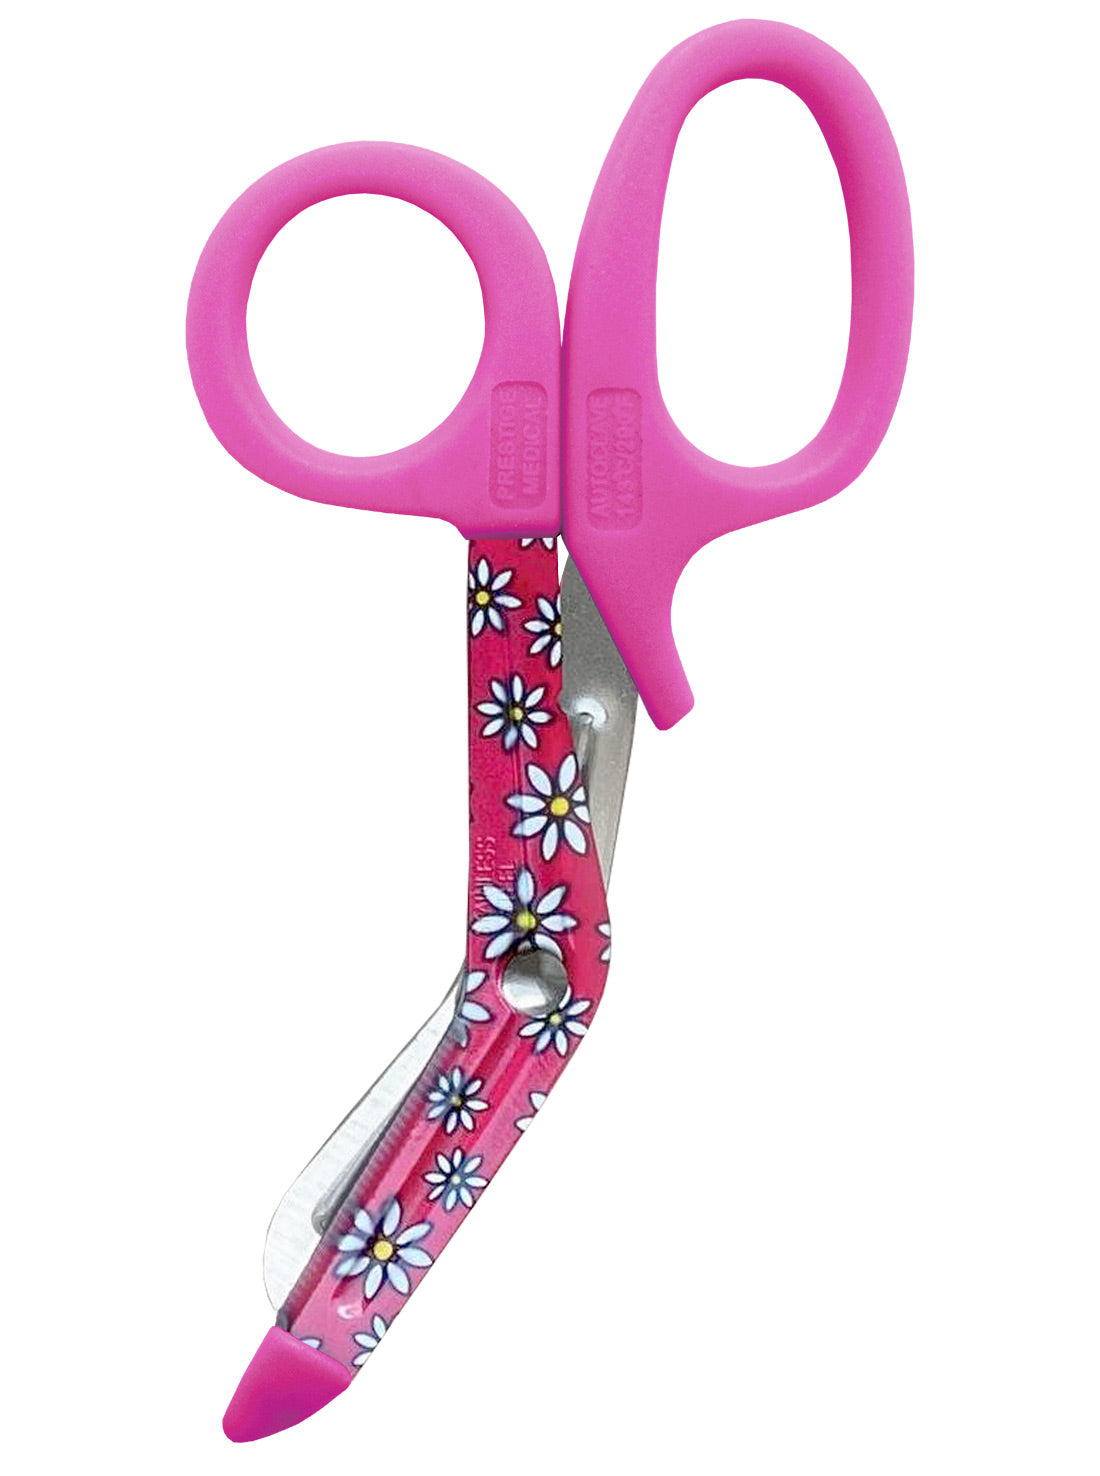 5.5" StyleMate Utility Scissor  by Prestige / Daisies Hot Pink